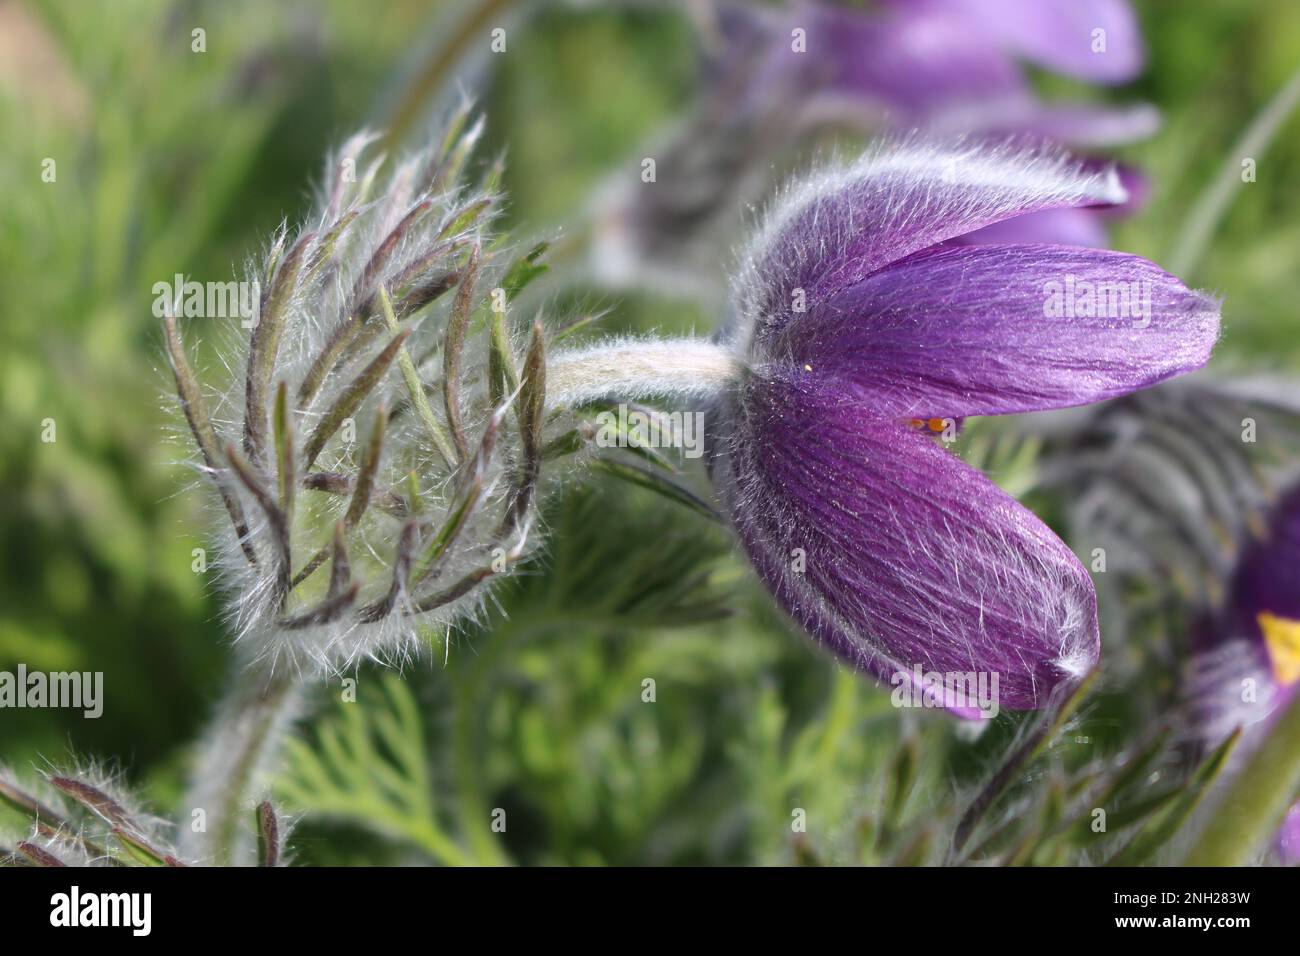 Cutleaf Anemone or Eastern Pasque Flower. A fuzzy purple spring flower seen here in the sun. One of the first flowers to bloom in early spring. Stock Photo